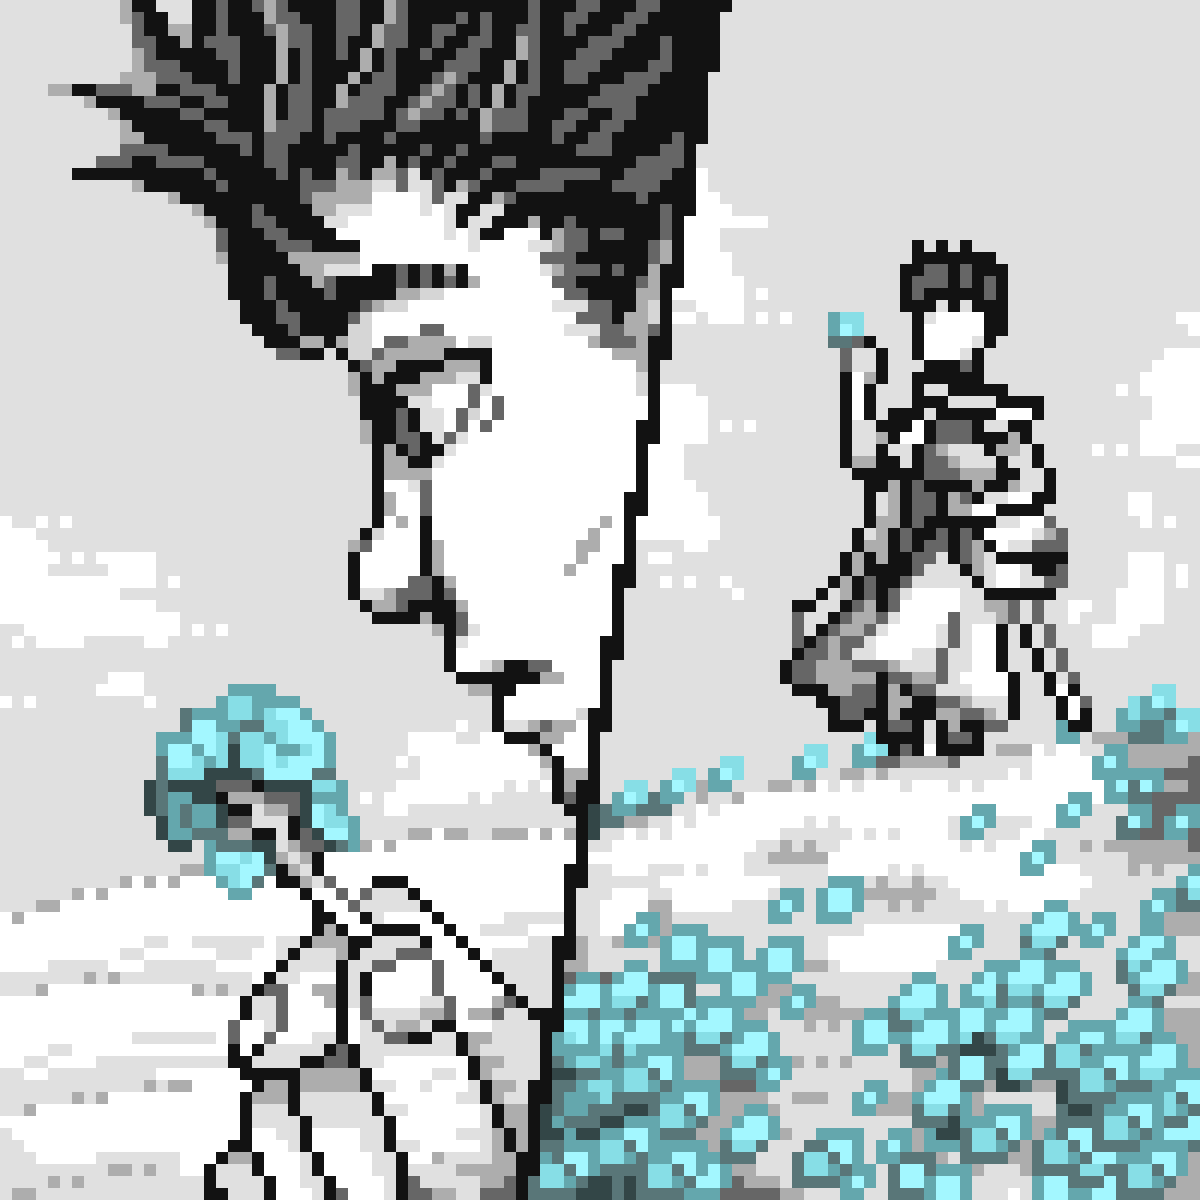 It's June...
The Month of #MensMentalHealthMonth 

I know you might be going through hard times,
But you're strong,
You'll get through them,
Just gotta keep going,
Peaceful times will come,
I promise 

#pixelart #MensHealthMonth #Berserk #Guts #digitalart #manga #mangaart